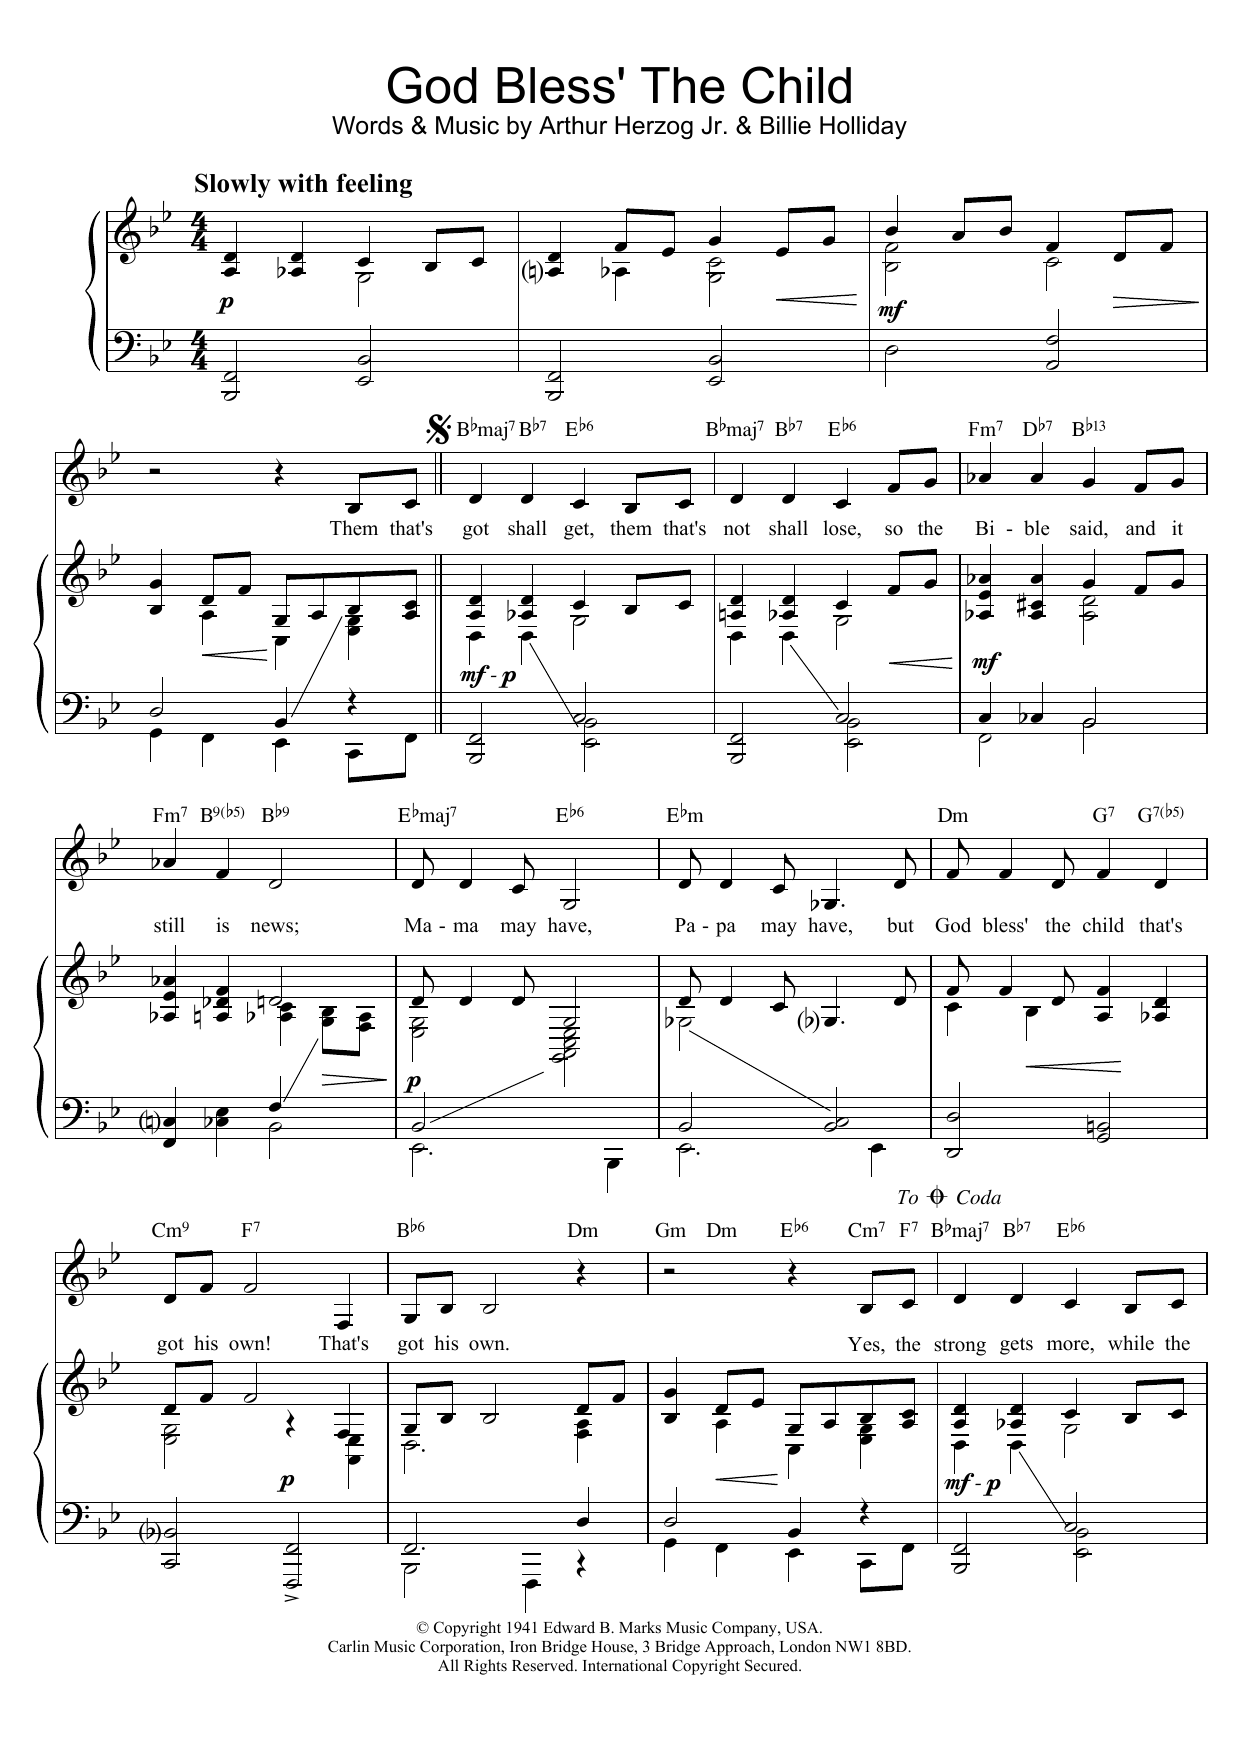 Billie Holiday God Bless' The Child sheet music notes and chords. Download Printable PDF.